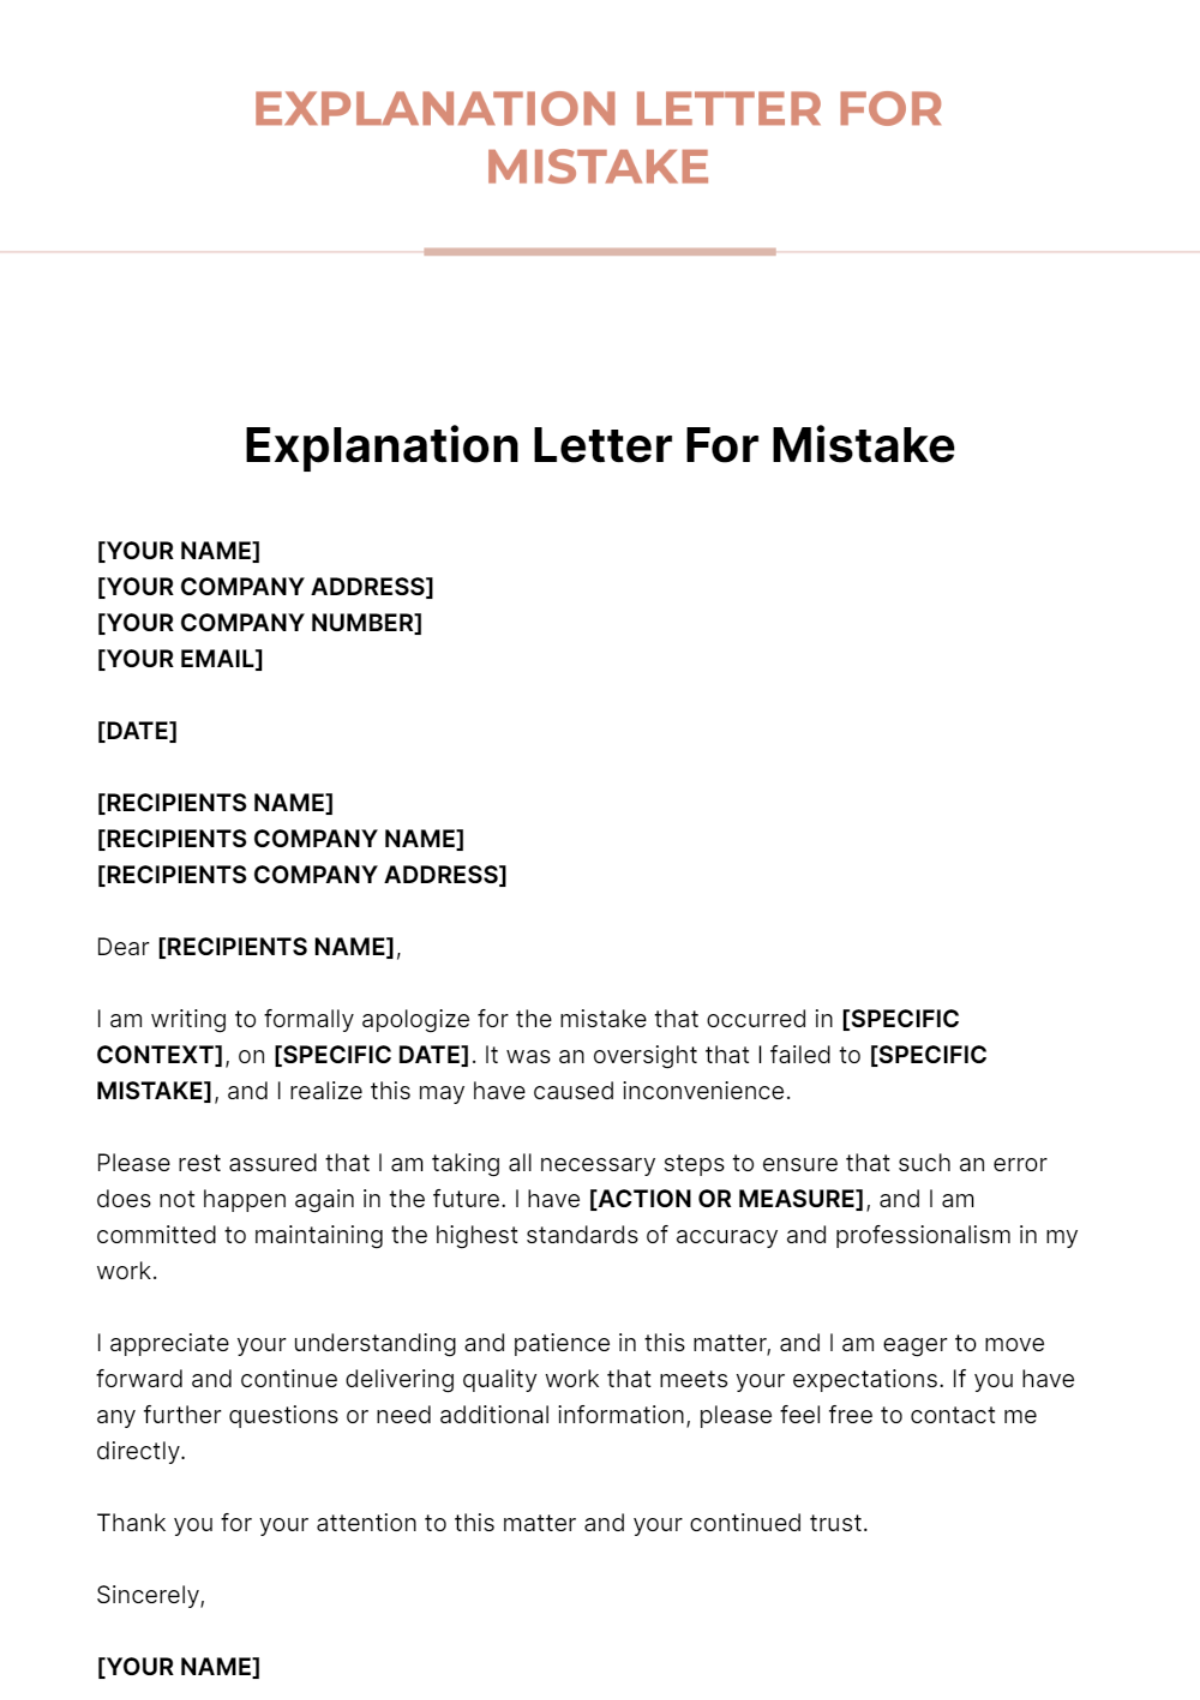 Explanation Letter For Mistake Template